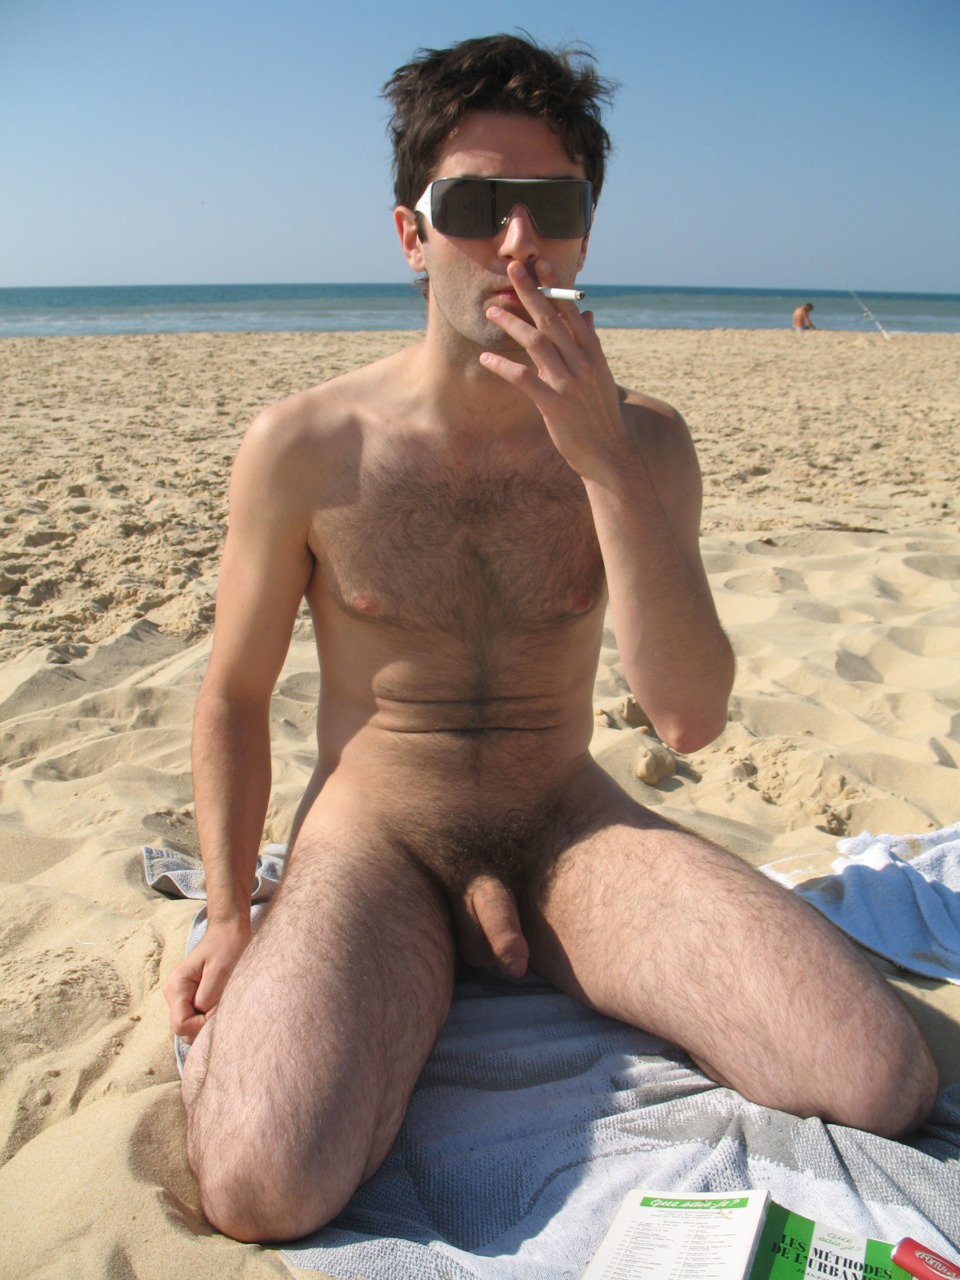 beaches in nude Naked men